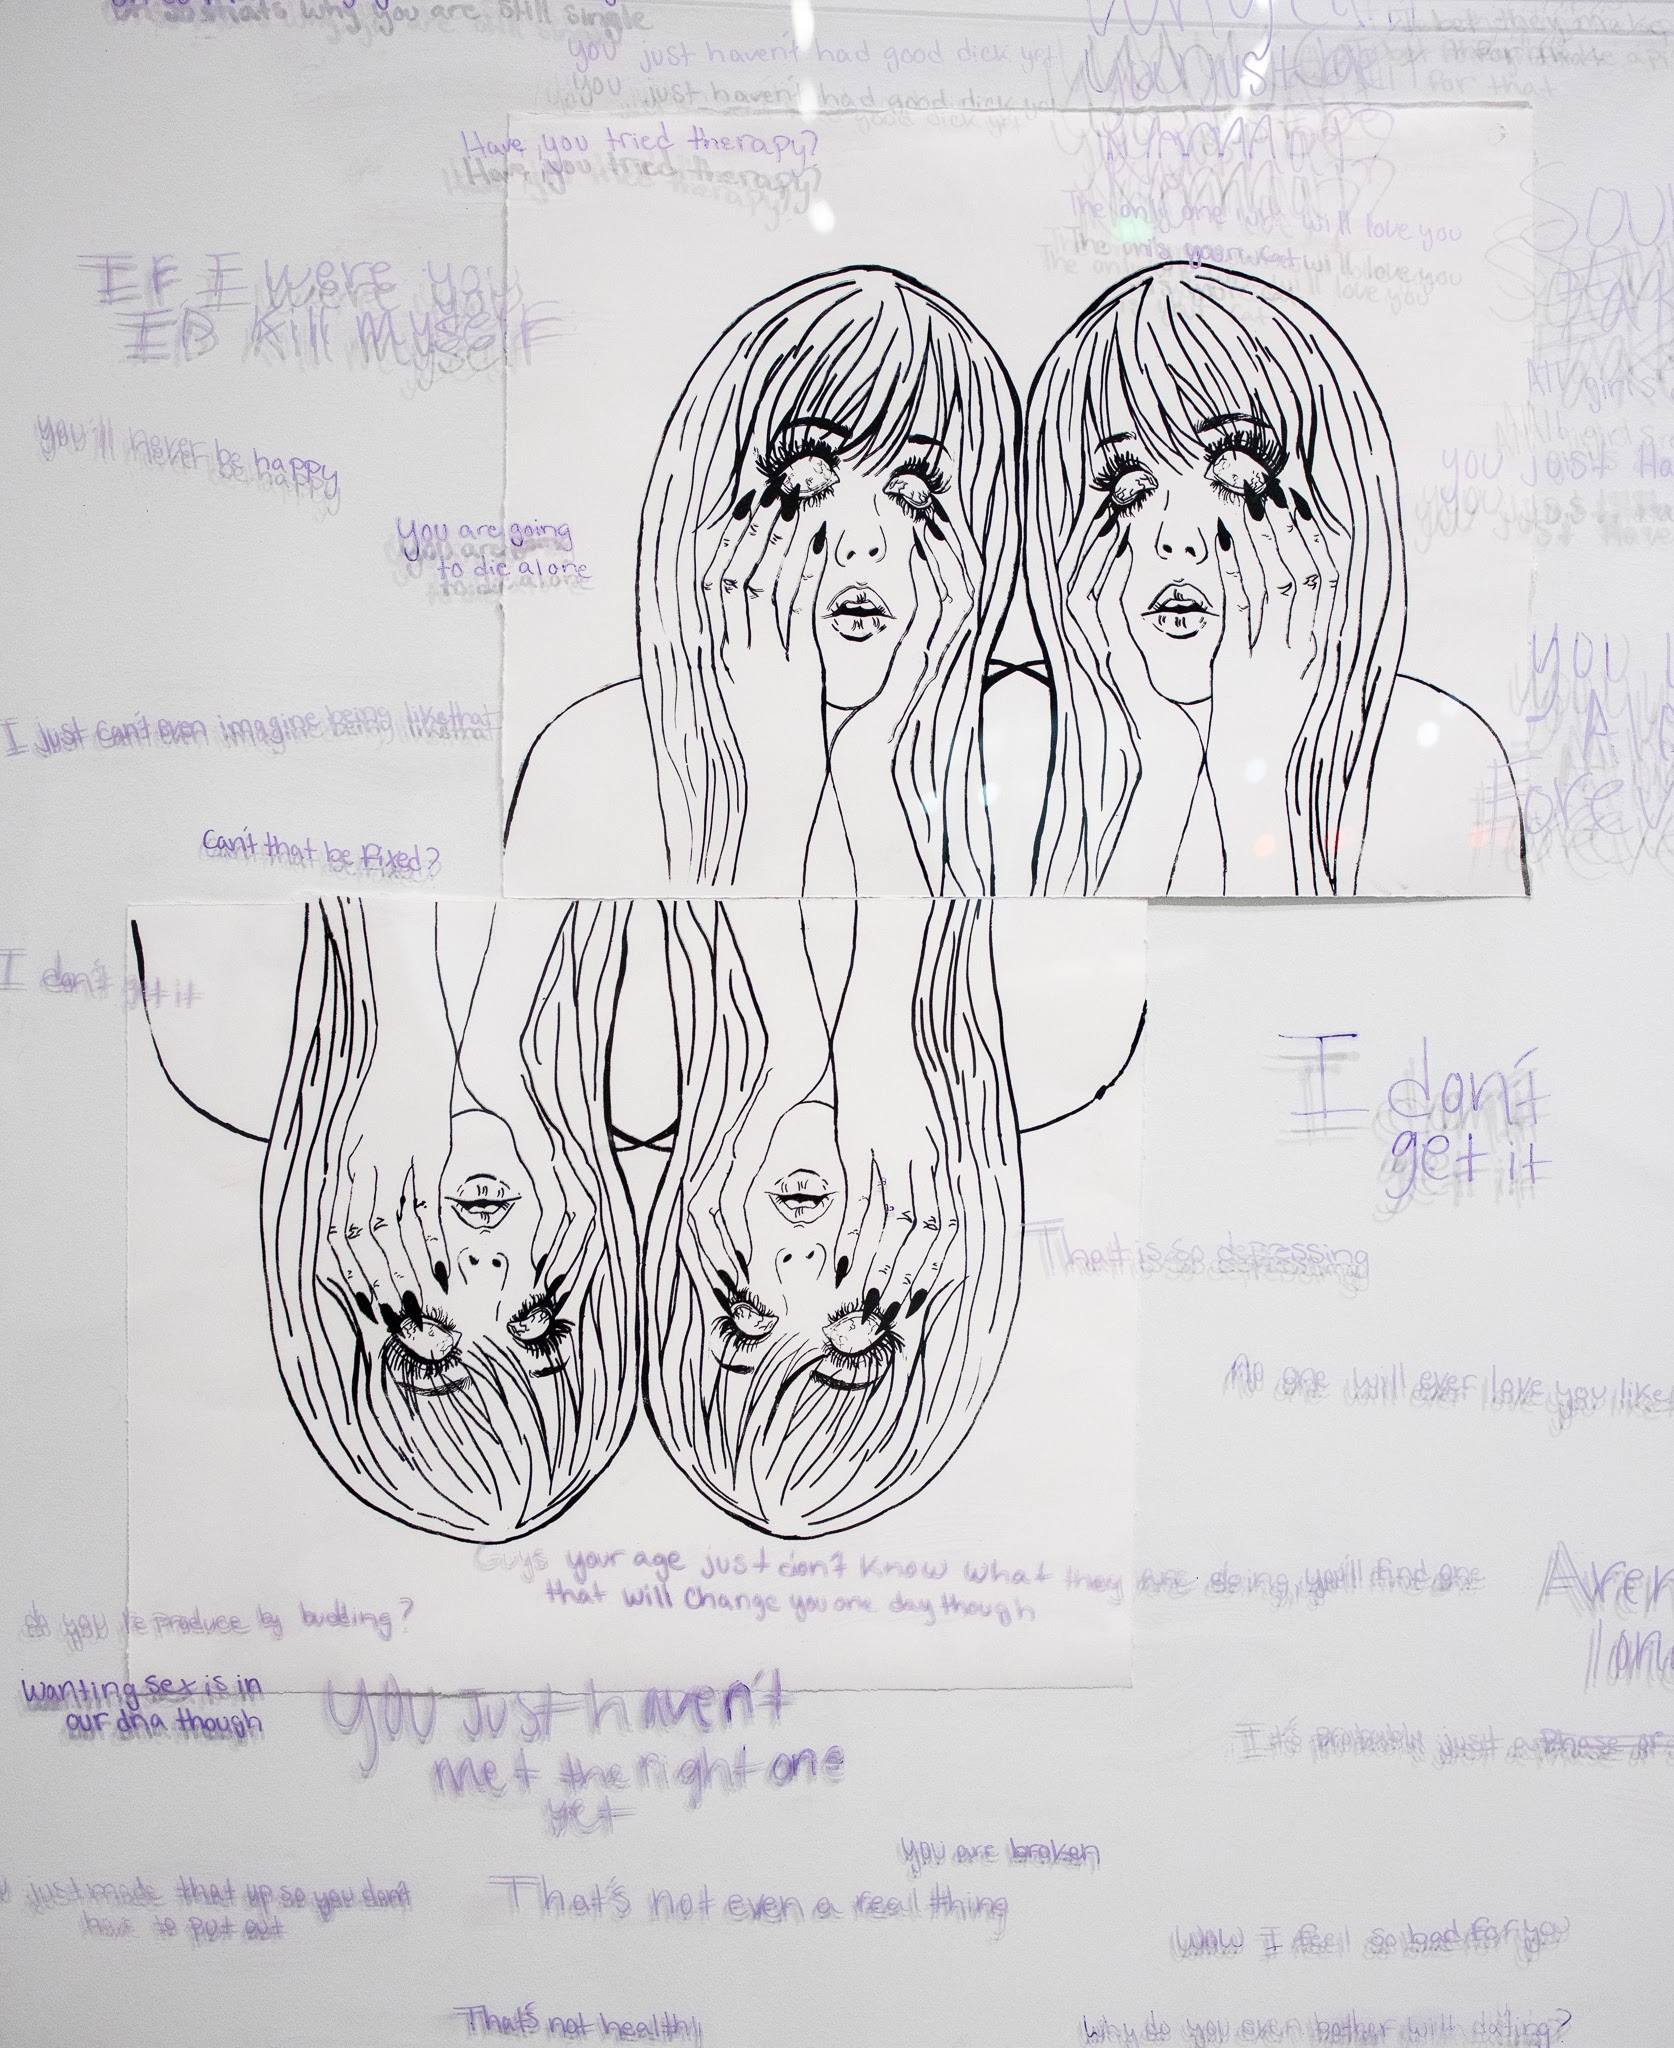 Printmaking installation with written words over white background and paper printed with black and purple illustration of a female with head in hands, eye rolling back.